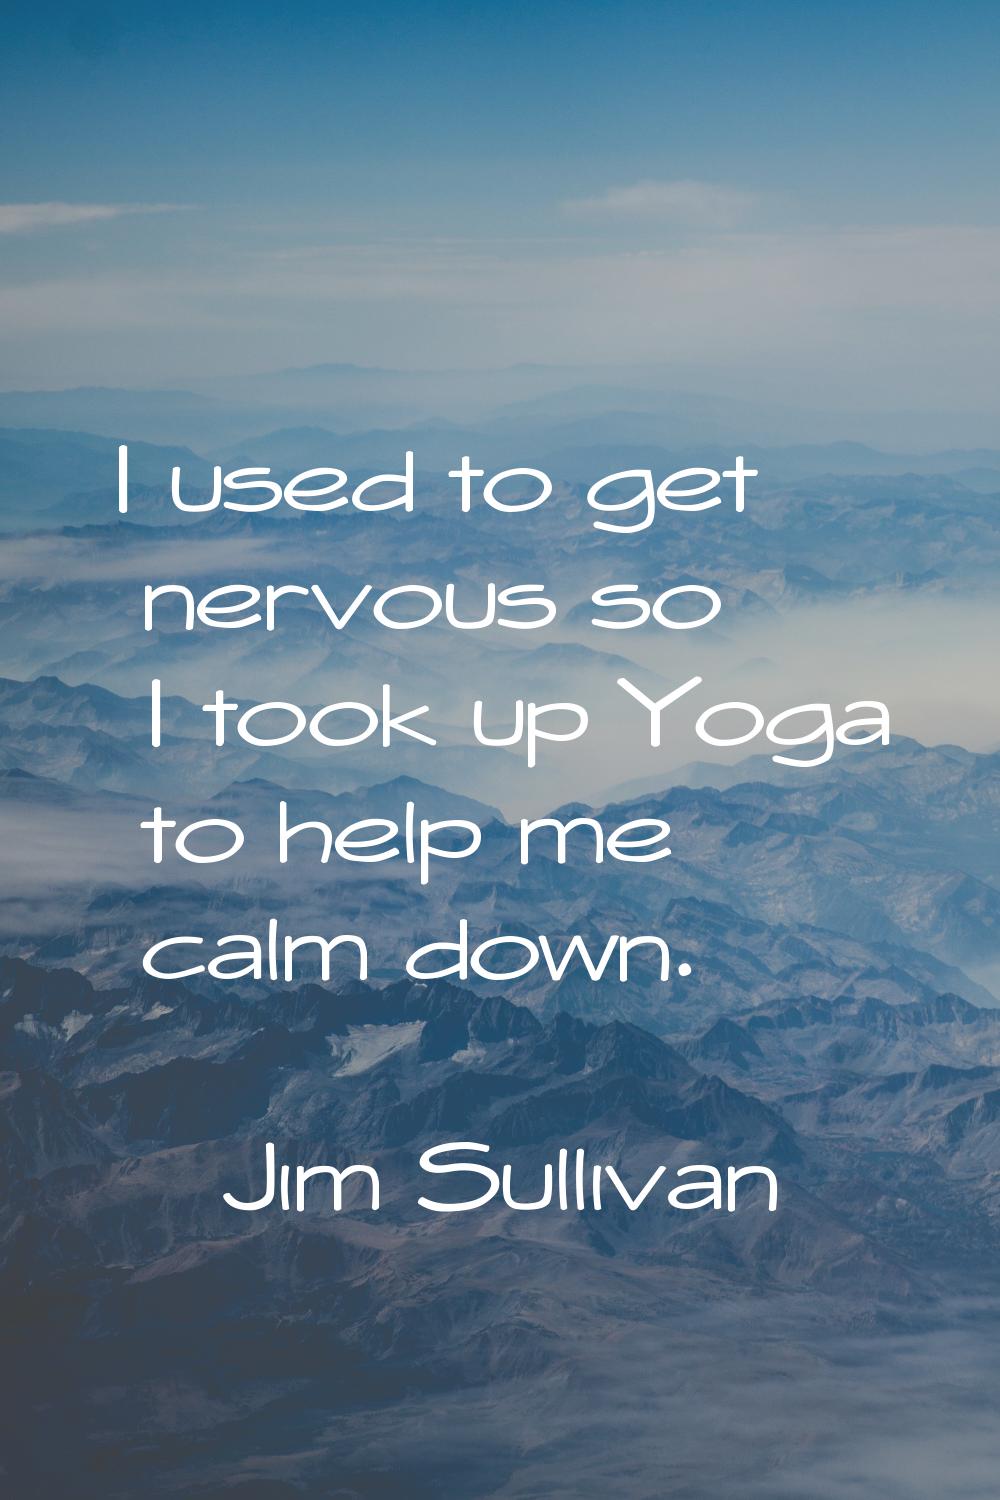 I used to get nervous so I took up Yoga to help me calm down.